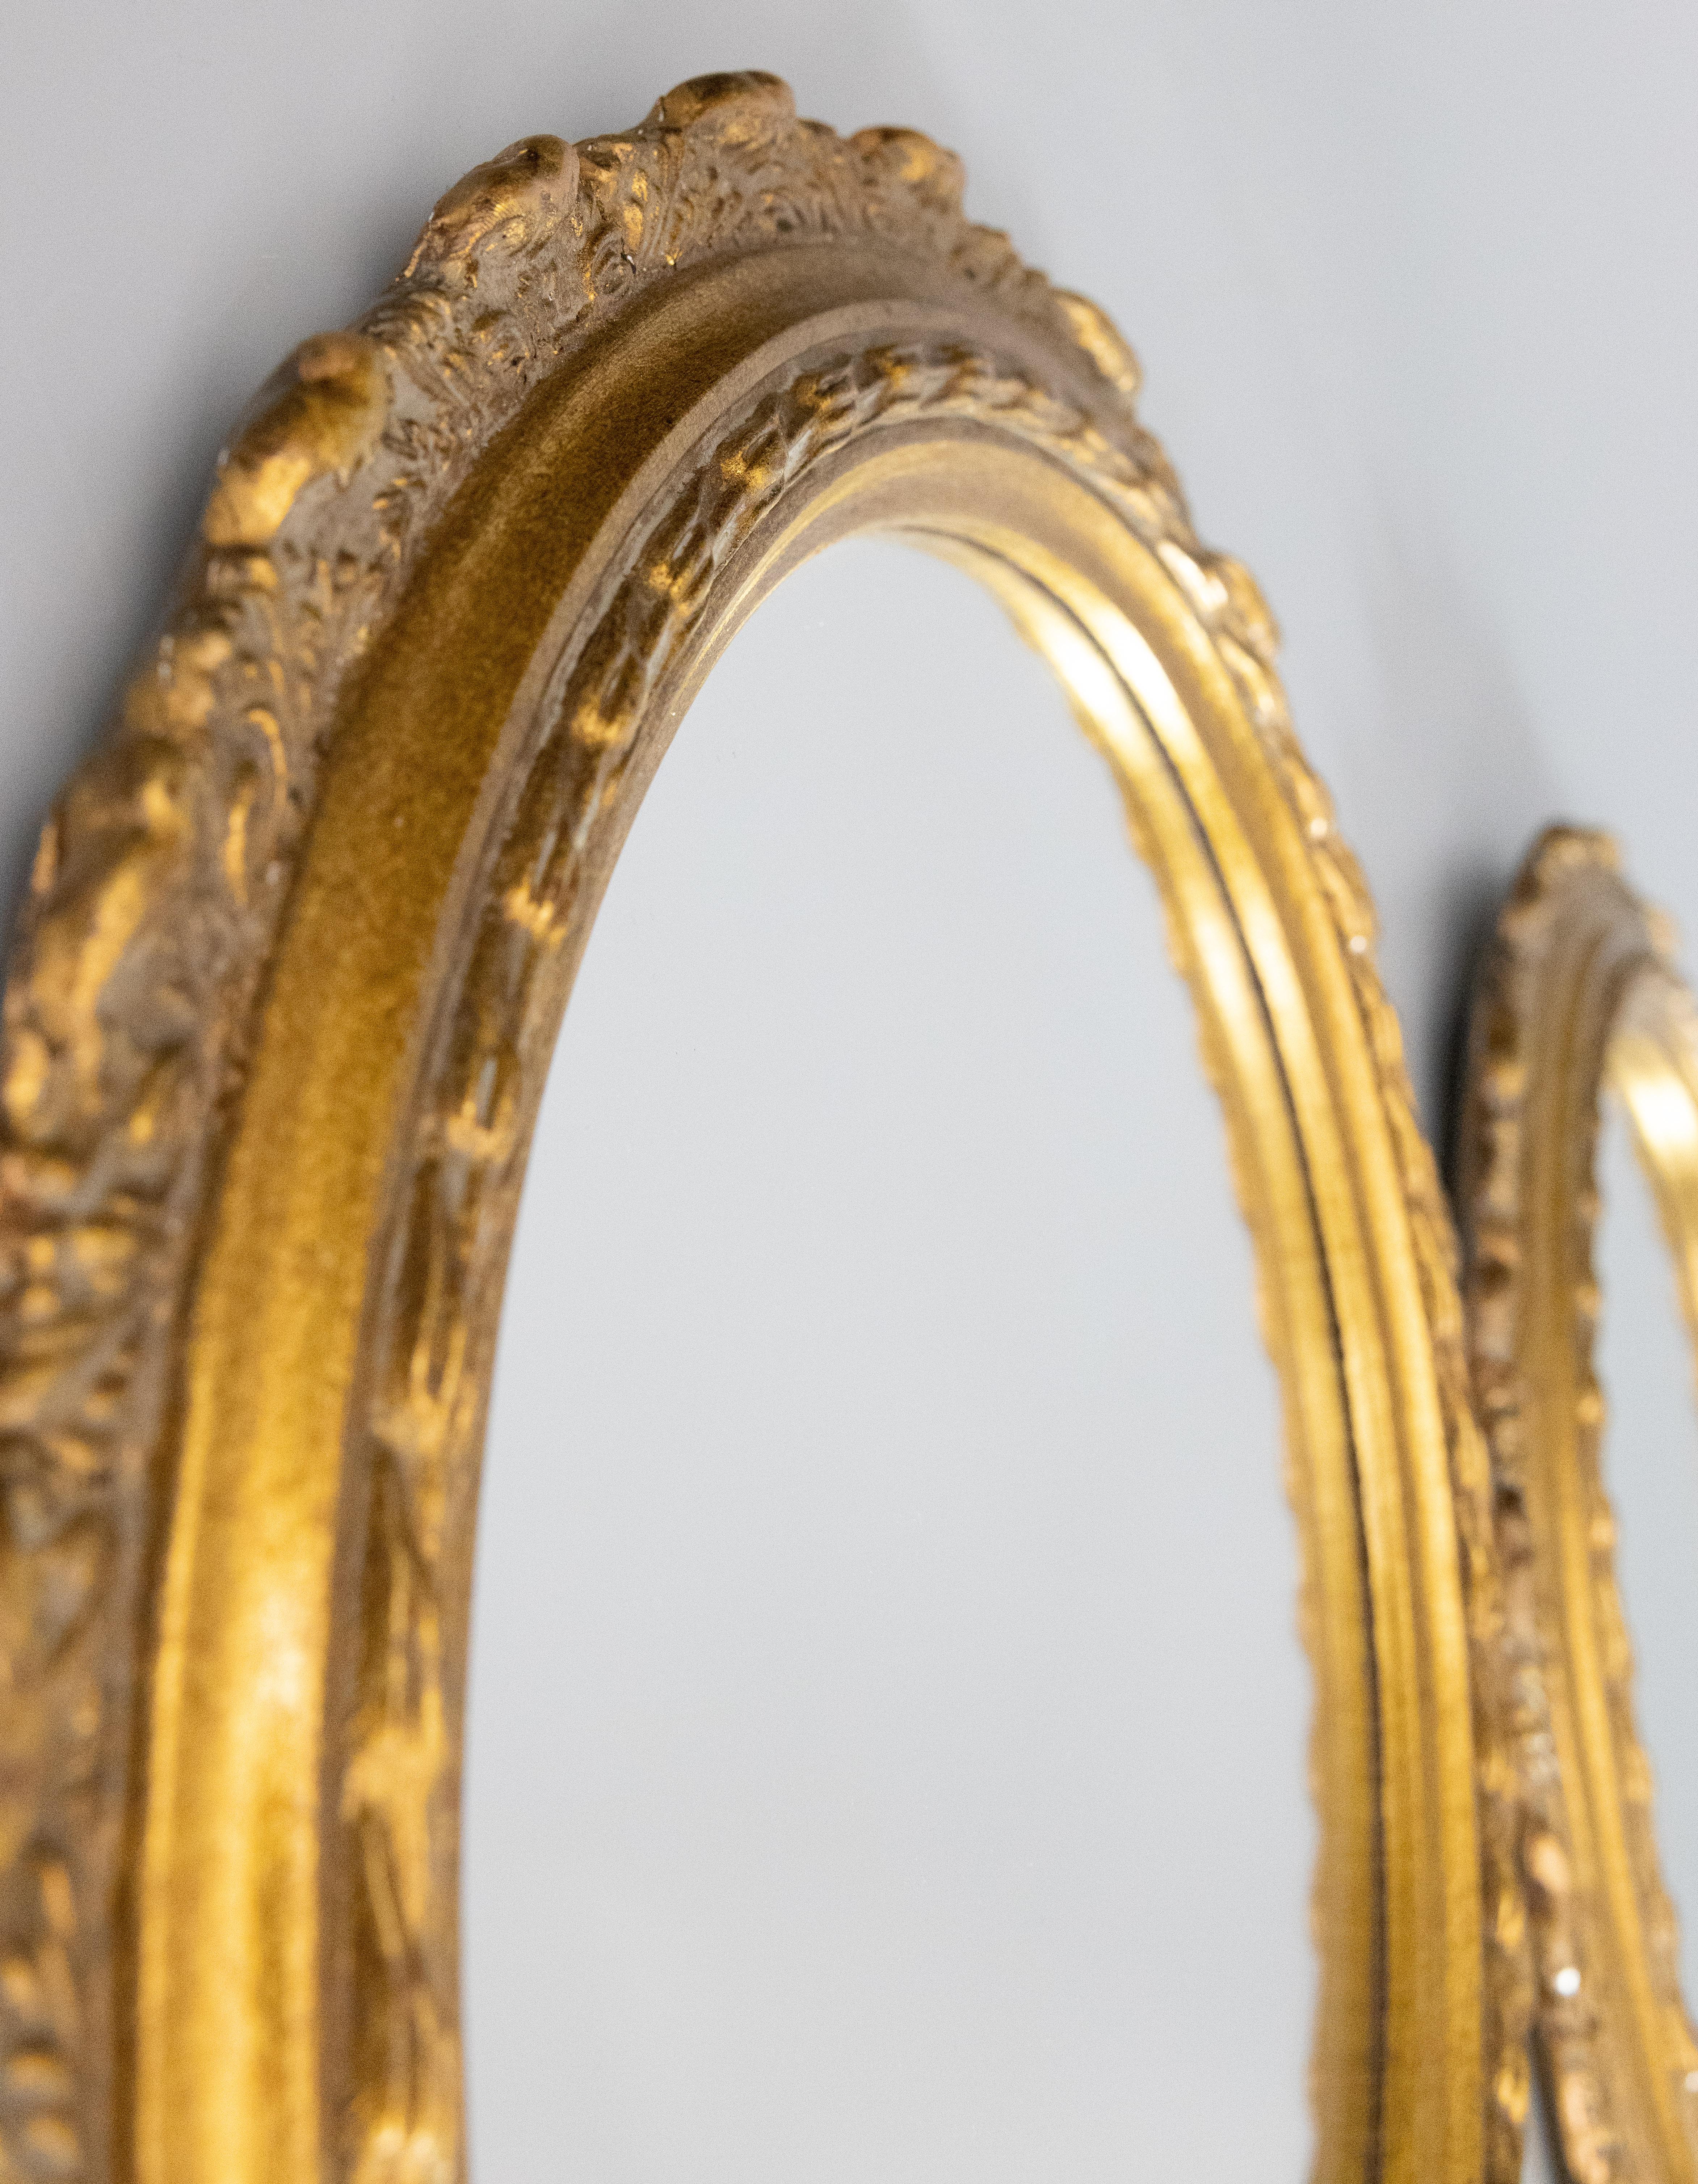 Pair of Mid-Century Italian Giltwood and Gesso Oval Mirrors, circa 1950 For Sale 2